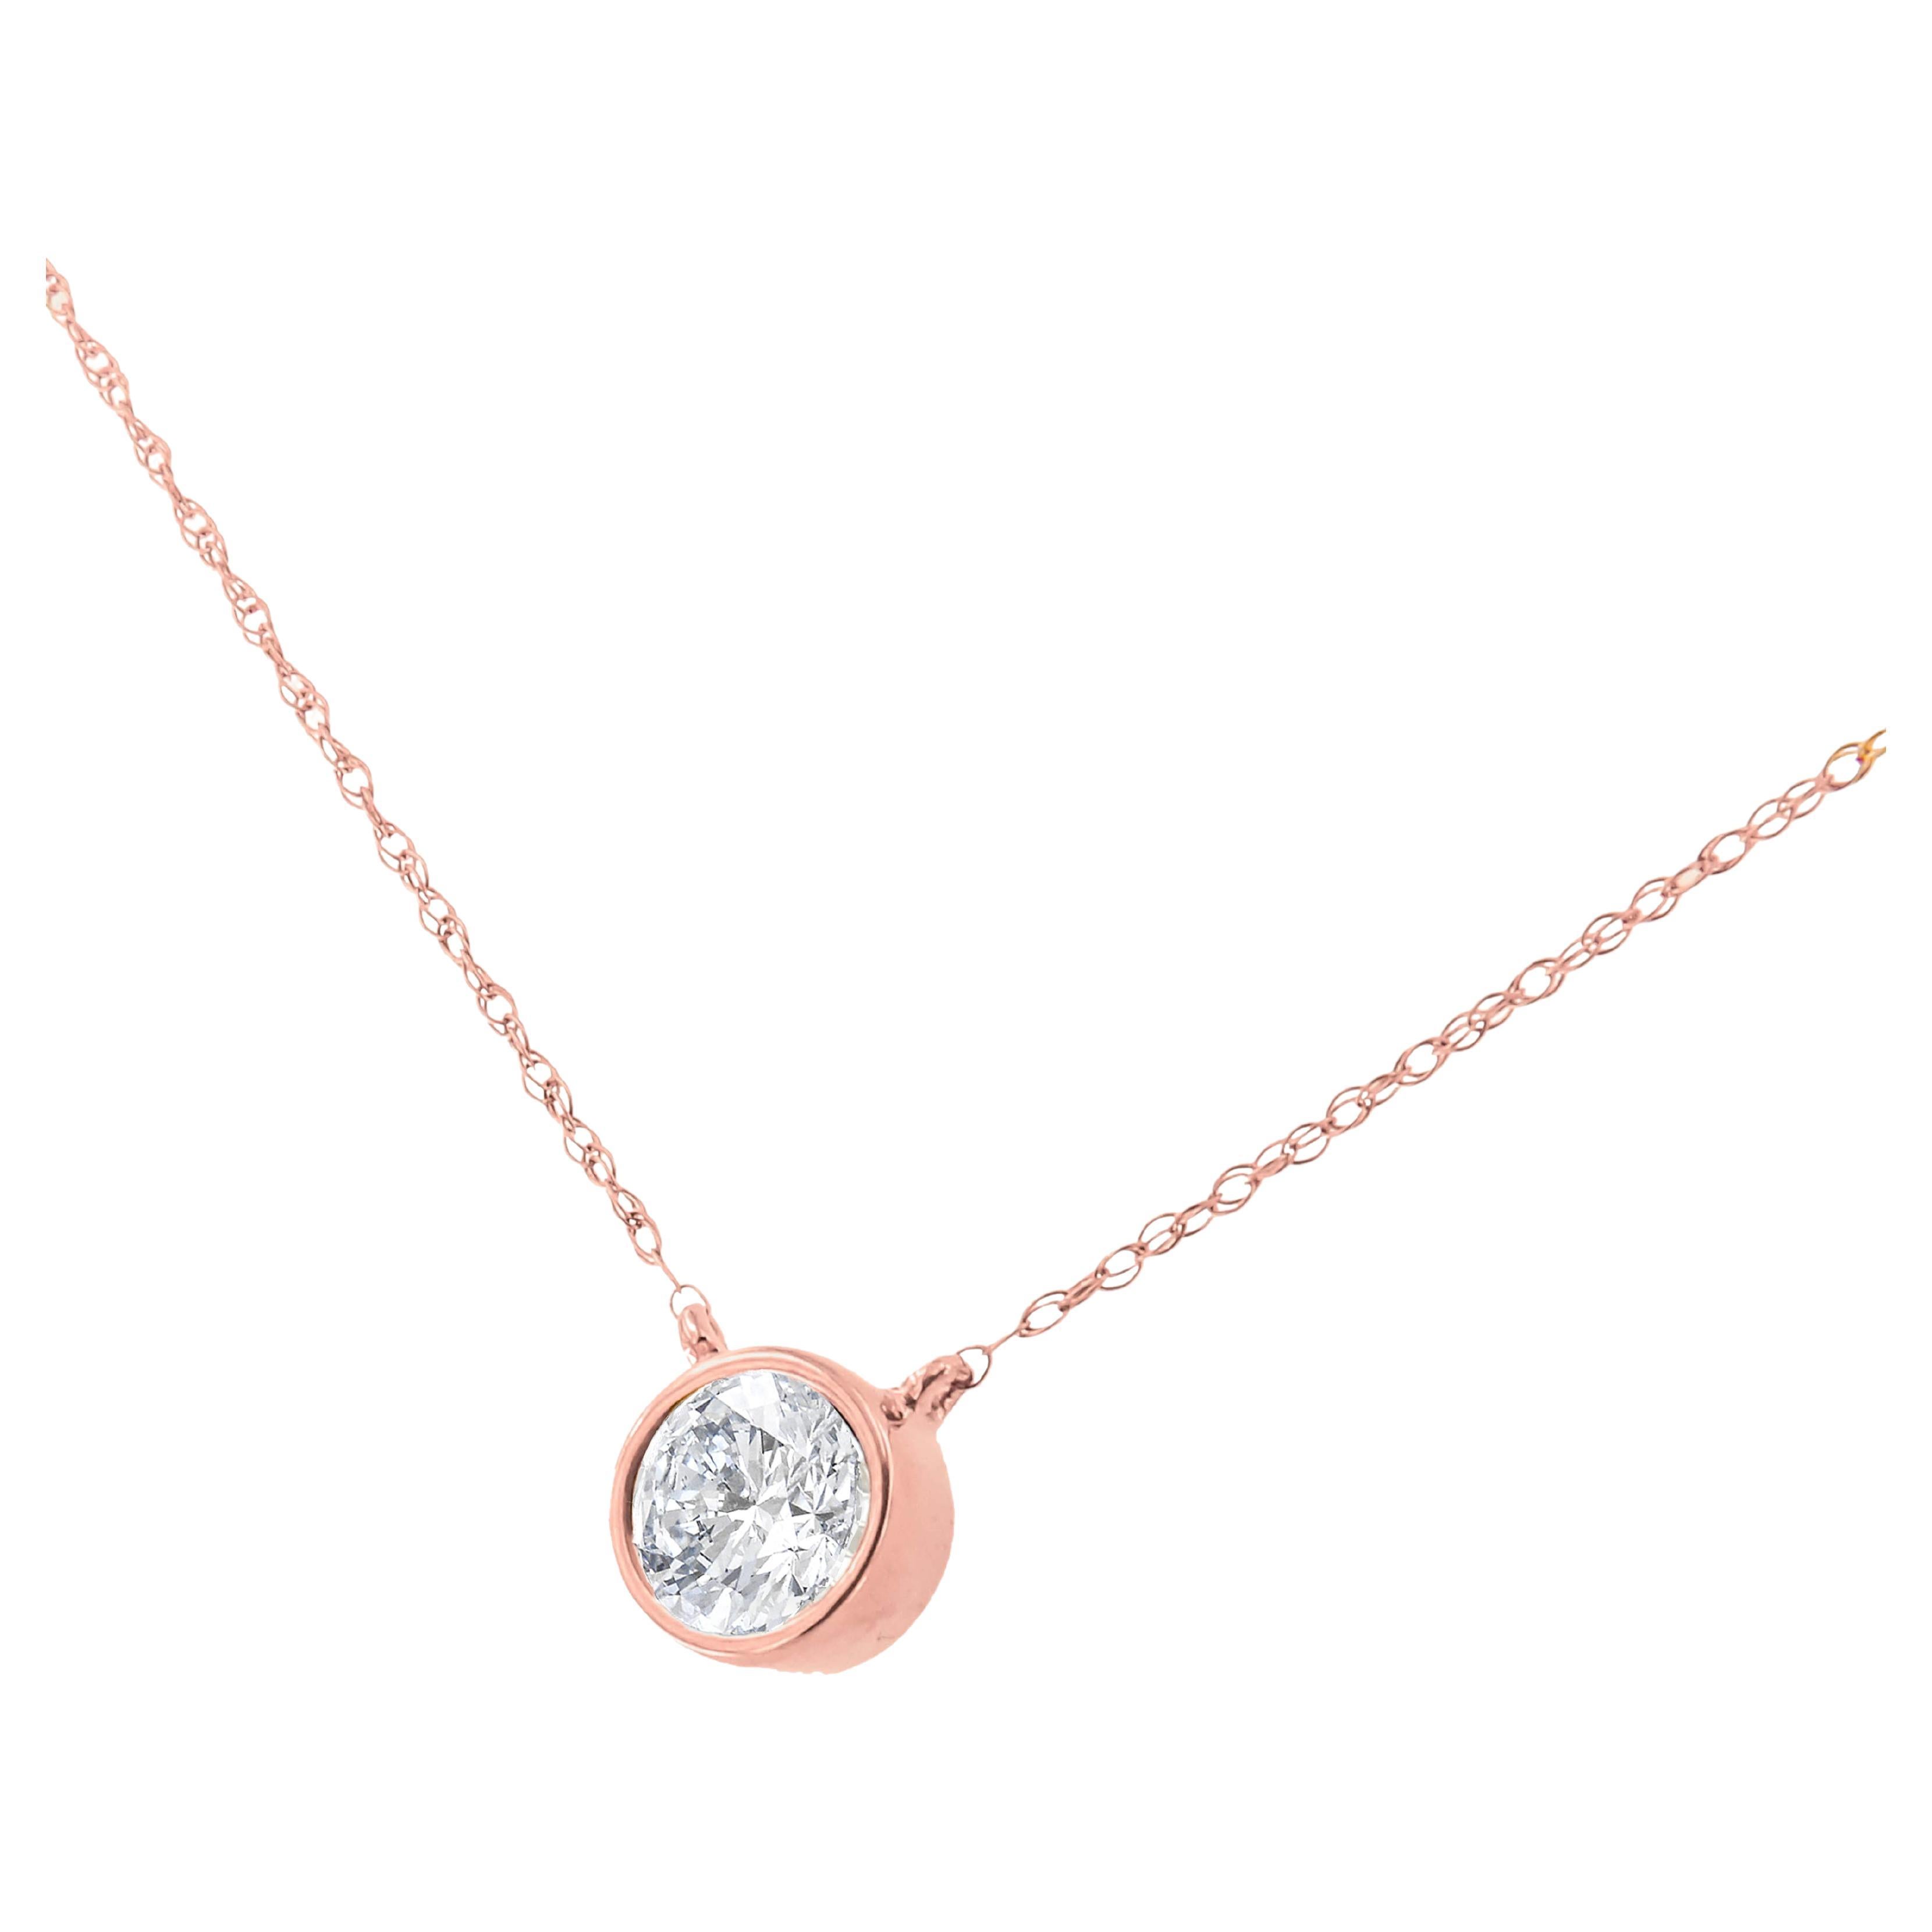 AGS Certified 10k Rose Gold 1/5 Carat Round Diamond Solitaire Pendant Necklace For Sale